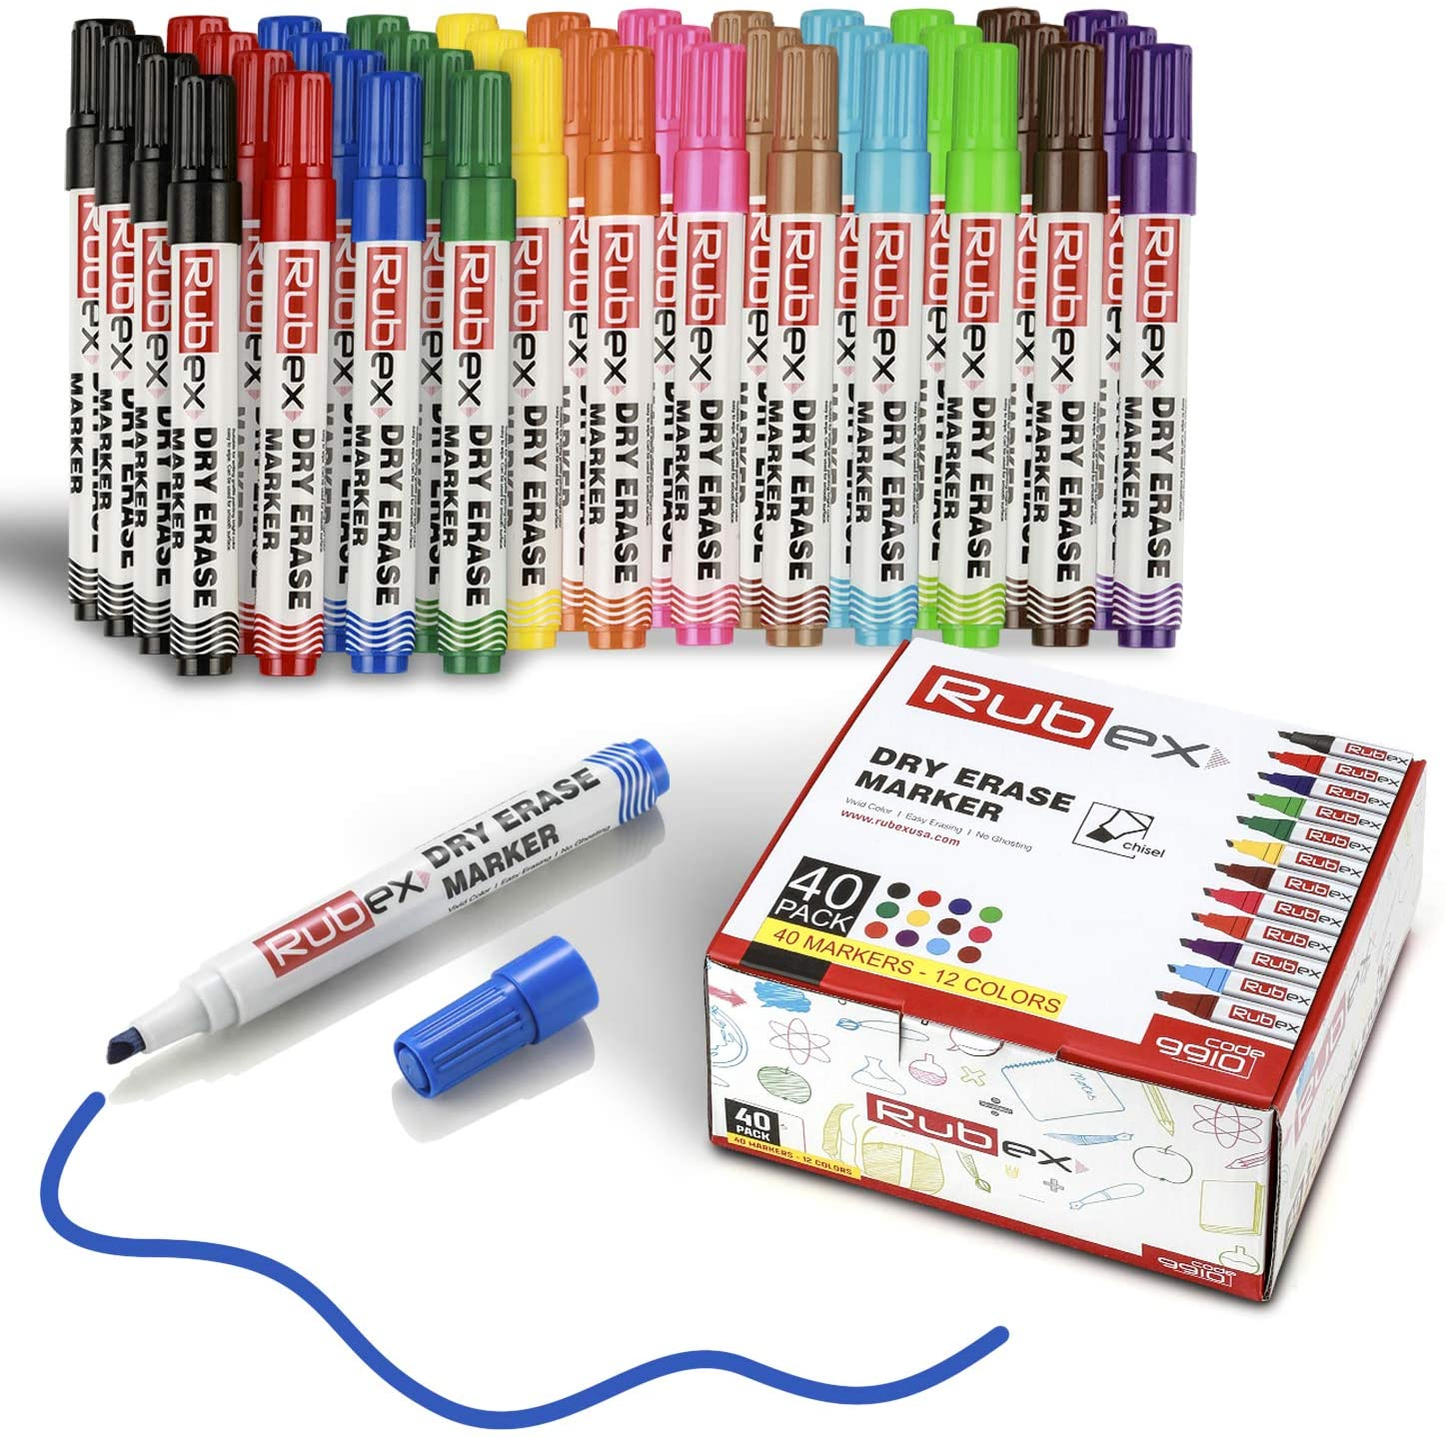 Dry Erase Marker , Set of 12 Colored Chisel Tip Low-Odor Ink Whiteboard Erasable Markers , Supplies for School, Teaching, Office, Home, Classrooms & Kids , Assorted Pack